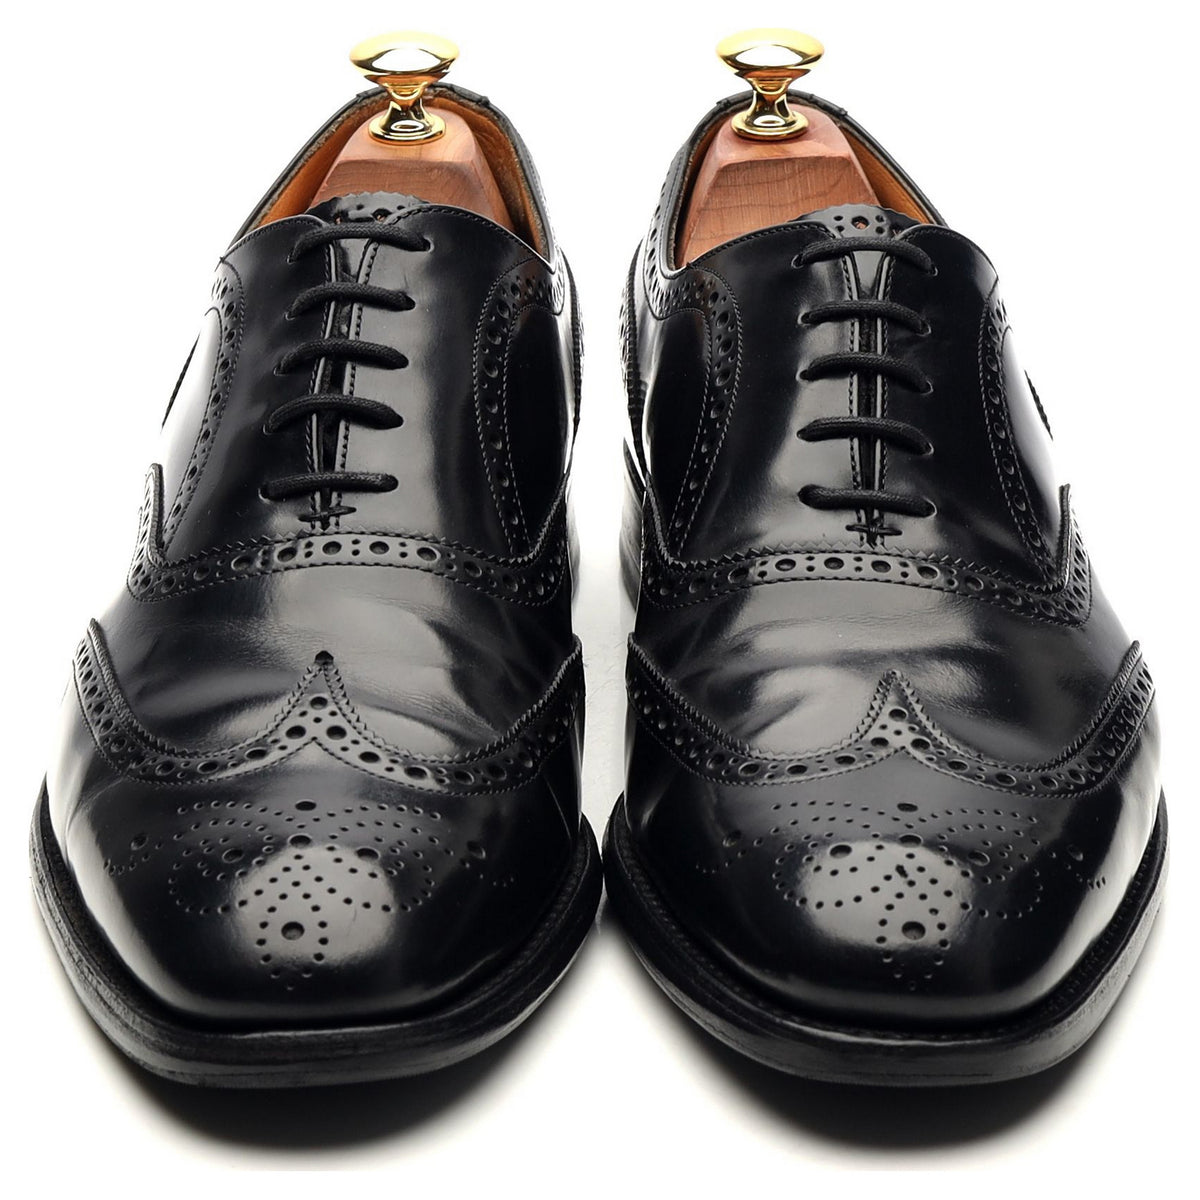 Black Leather Oxford Brogues UK 9.5 G